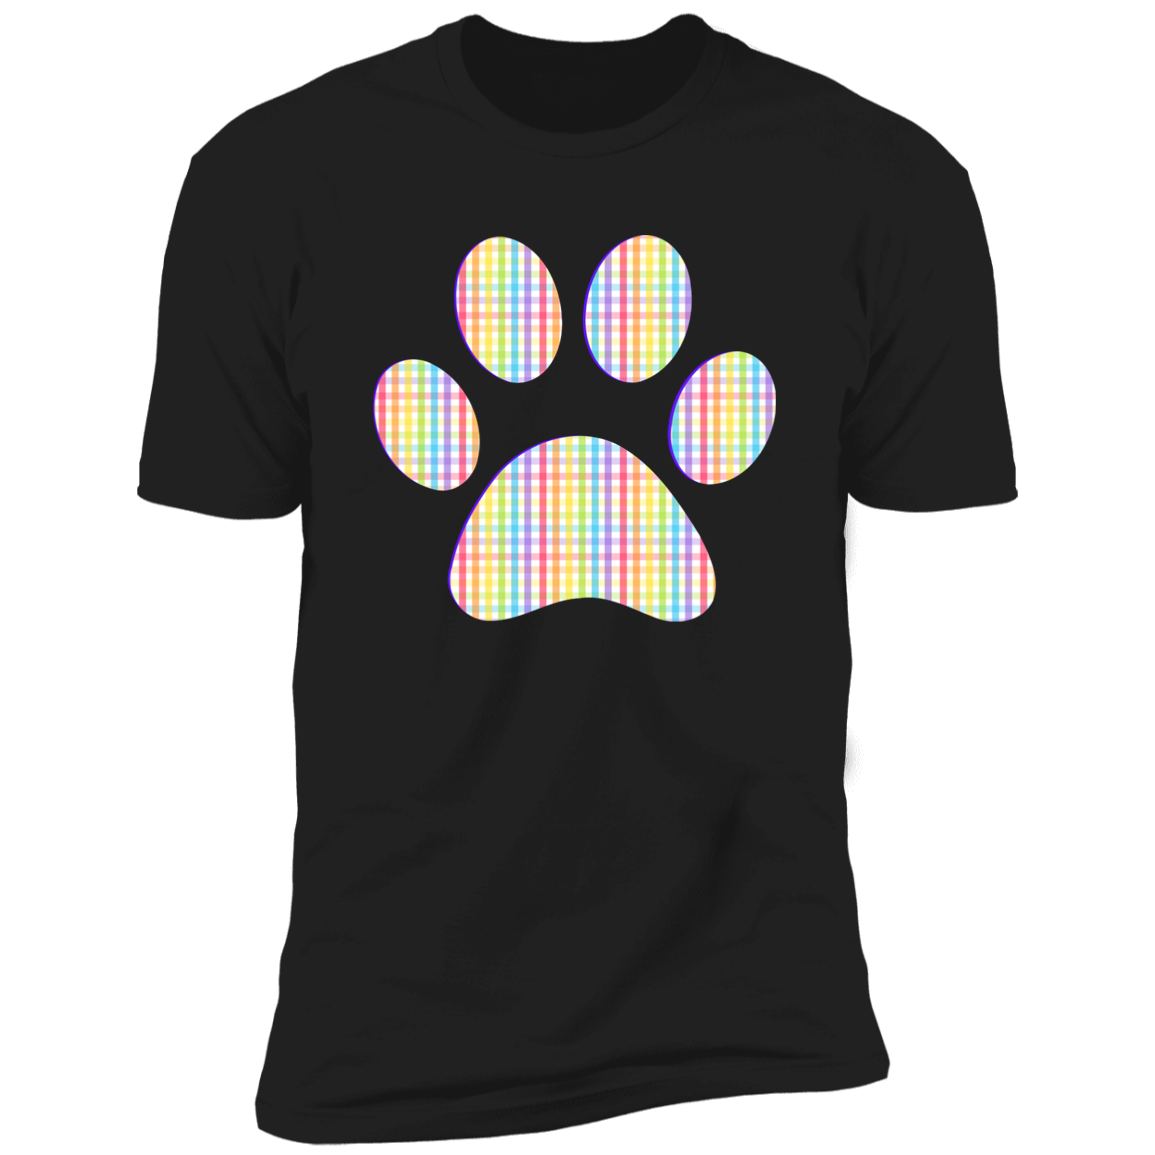 Pride Paw (Gingham) Pride T-shirt, Paw Pride Dog Shirt for humans, in black